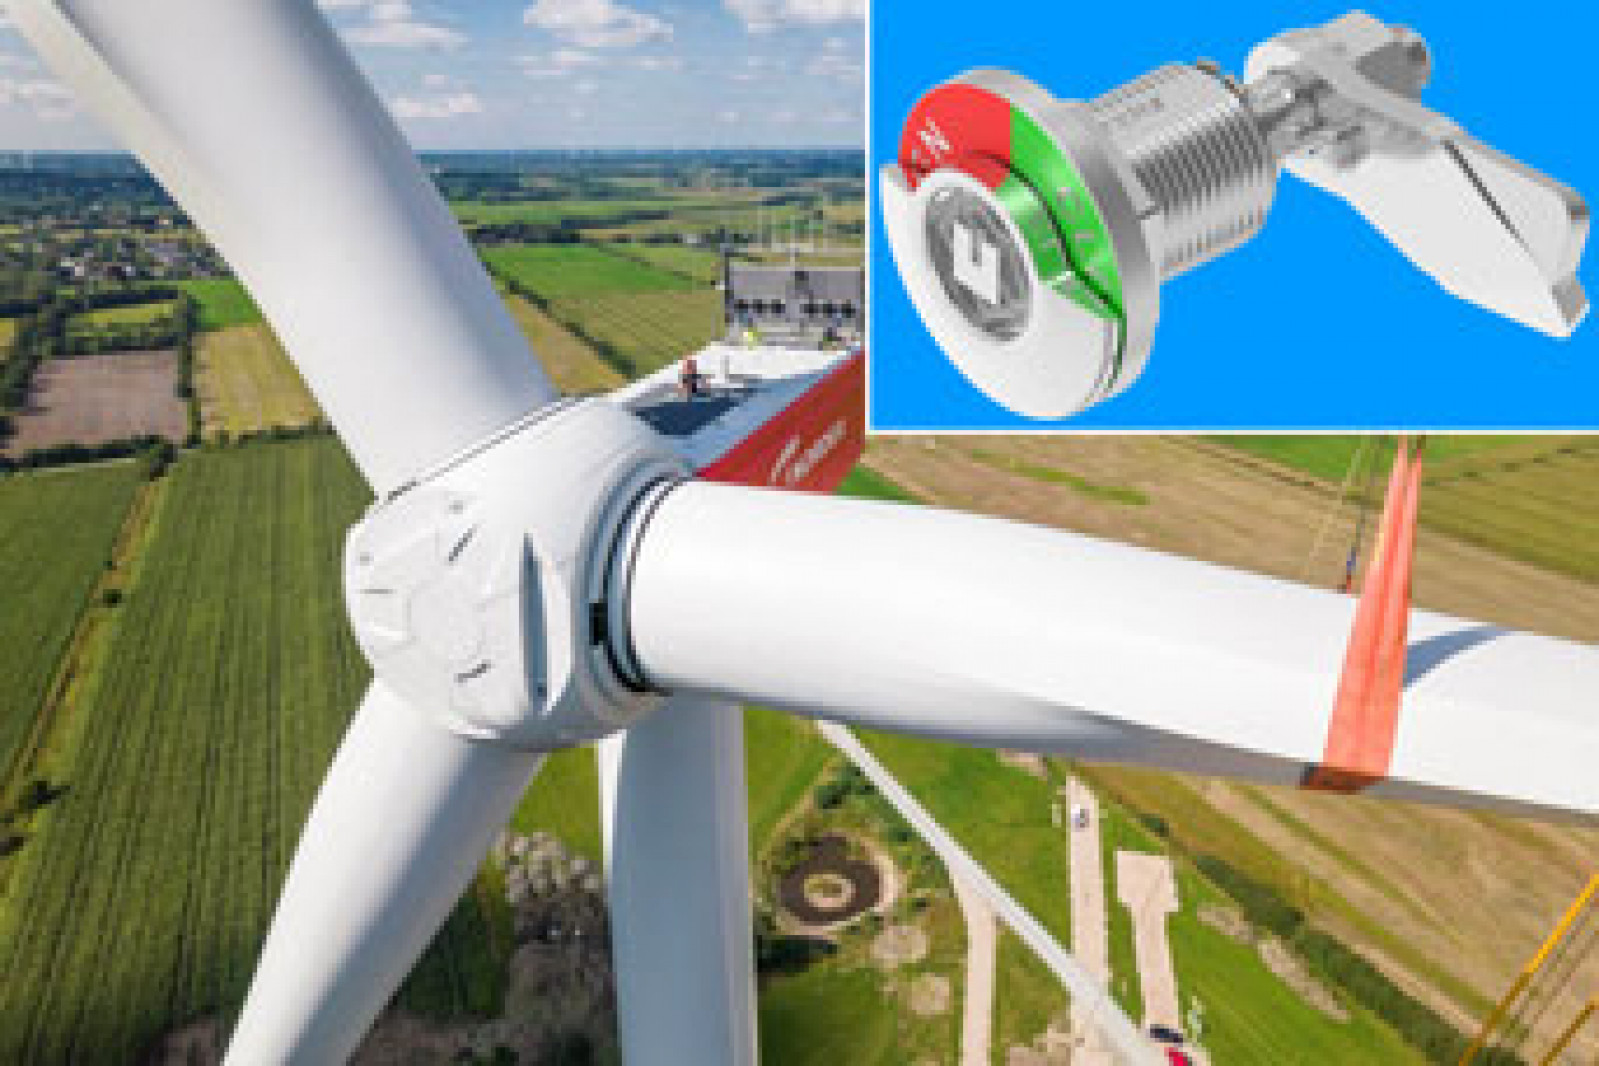 EMKA compression latches aid wind power from Norde...